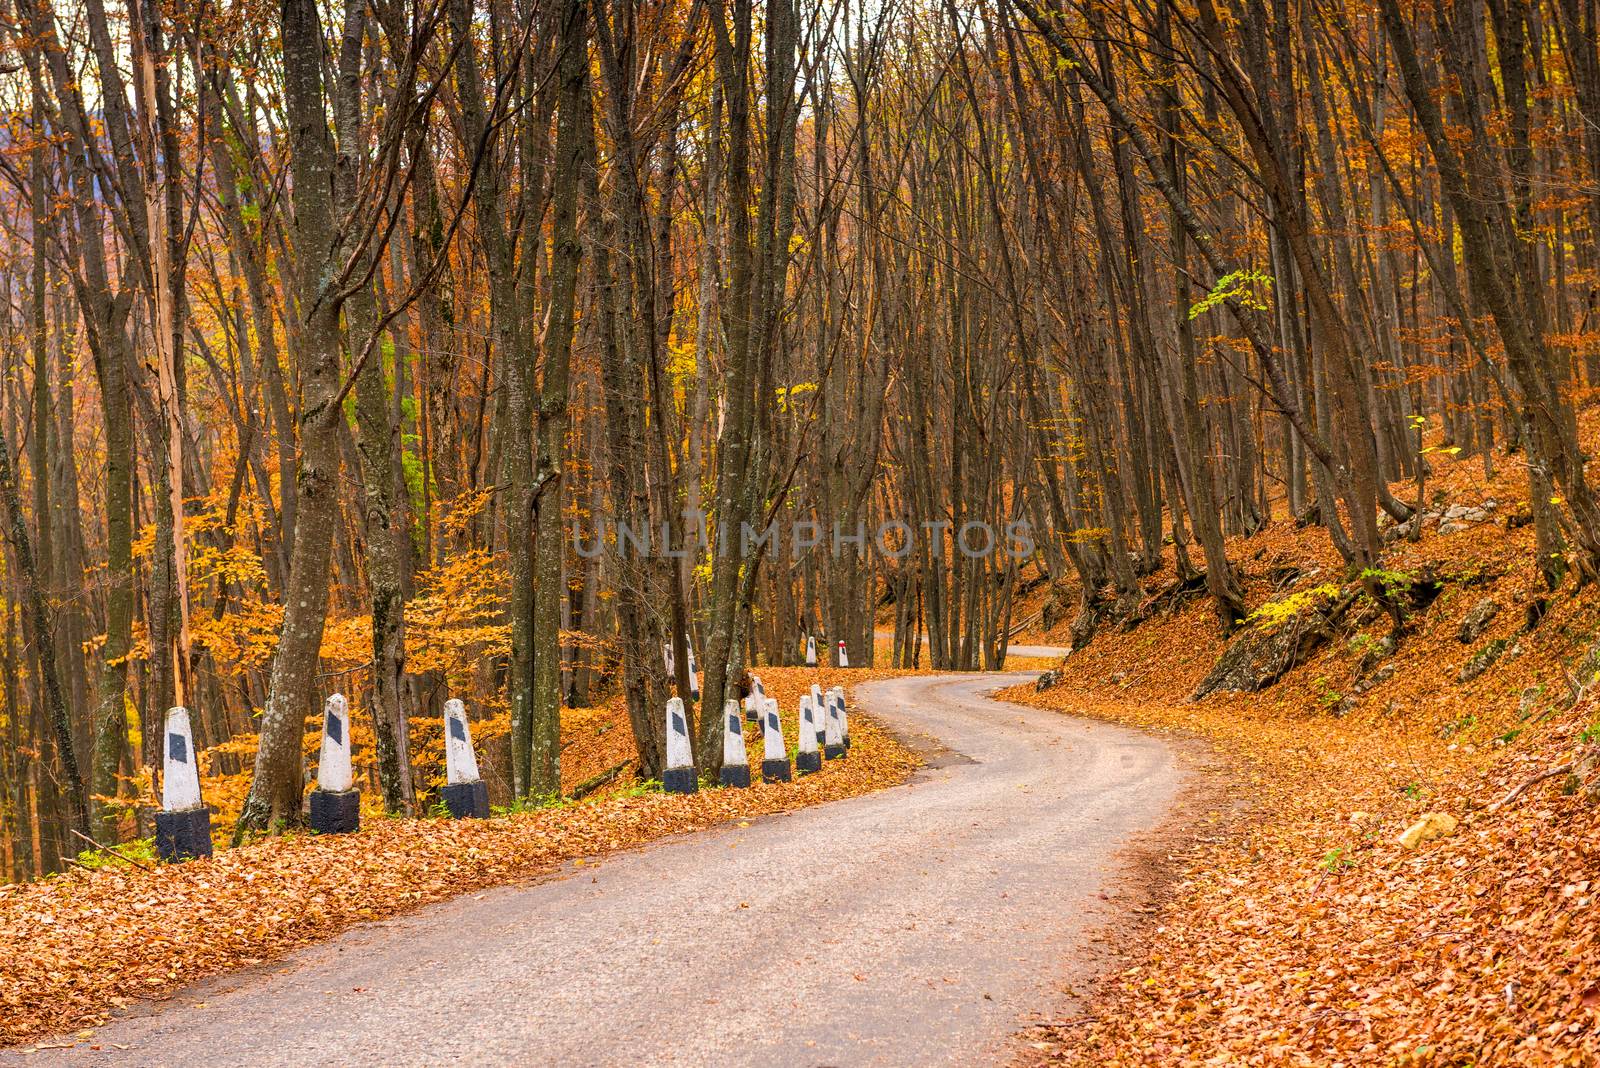 Winding mountain road in the autumn afternoon surrounded by forest